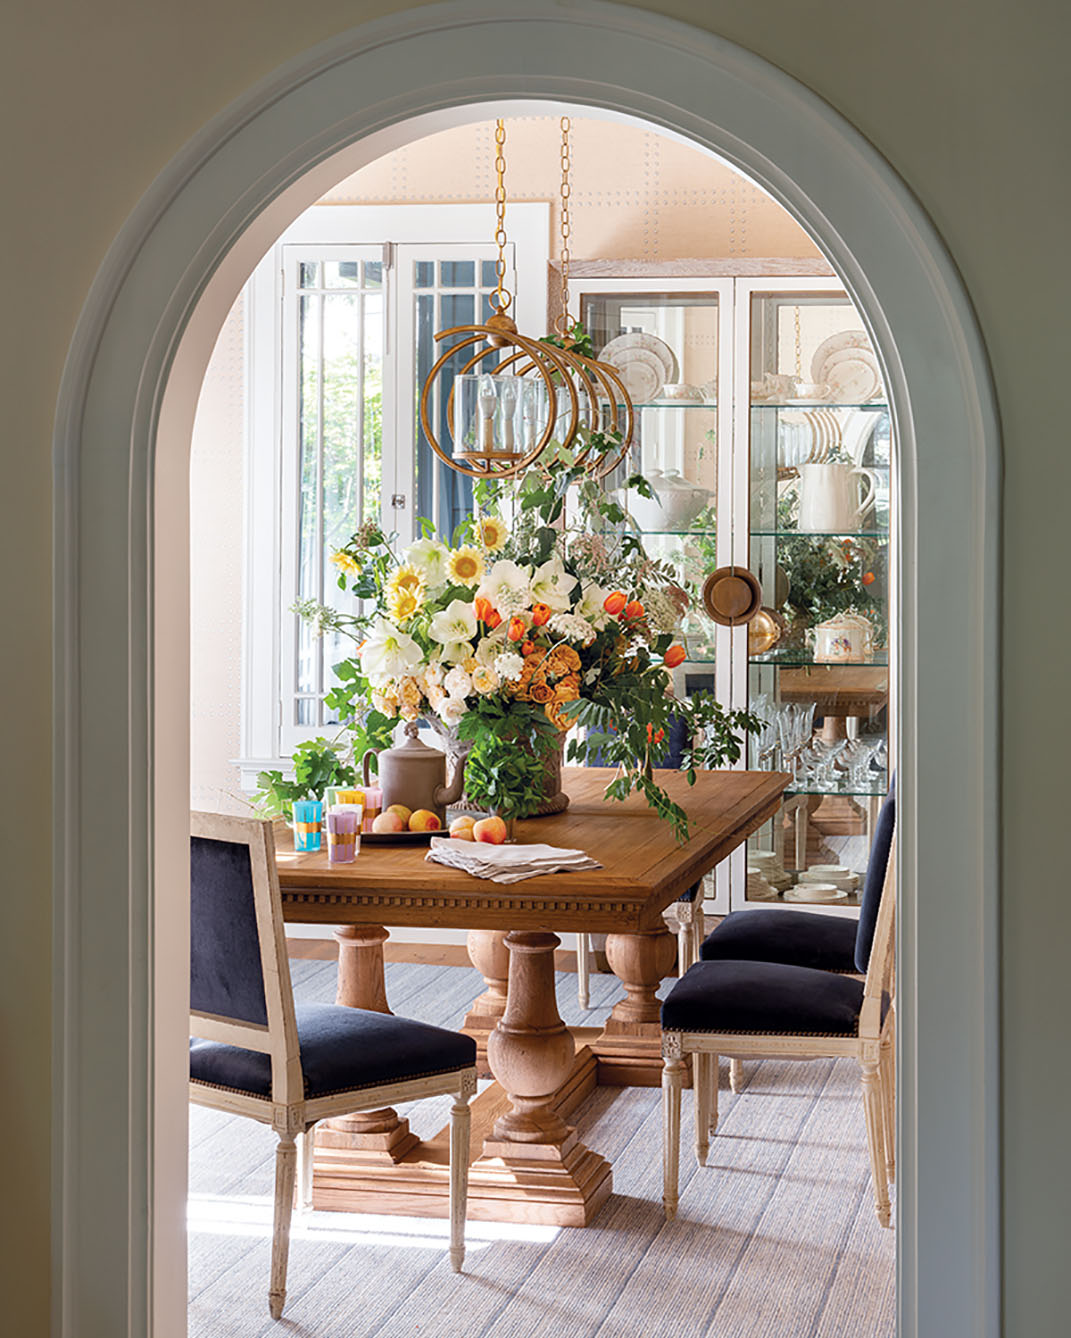 Framed by an arched entrance, a linear light fixture draws the eye through the dining room. The centerpiece features amaryllis, roses, ‘Italian White’ sunflowers, French tulips, wild grapevine, and wisteria. All floral designs by Jimmie Henslee. Interiors by Denise McGaha. Location: Dallas’ historic Highland Park